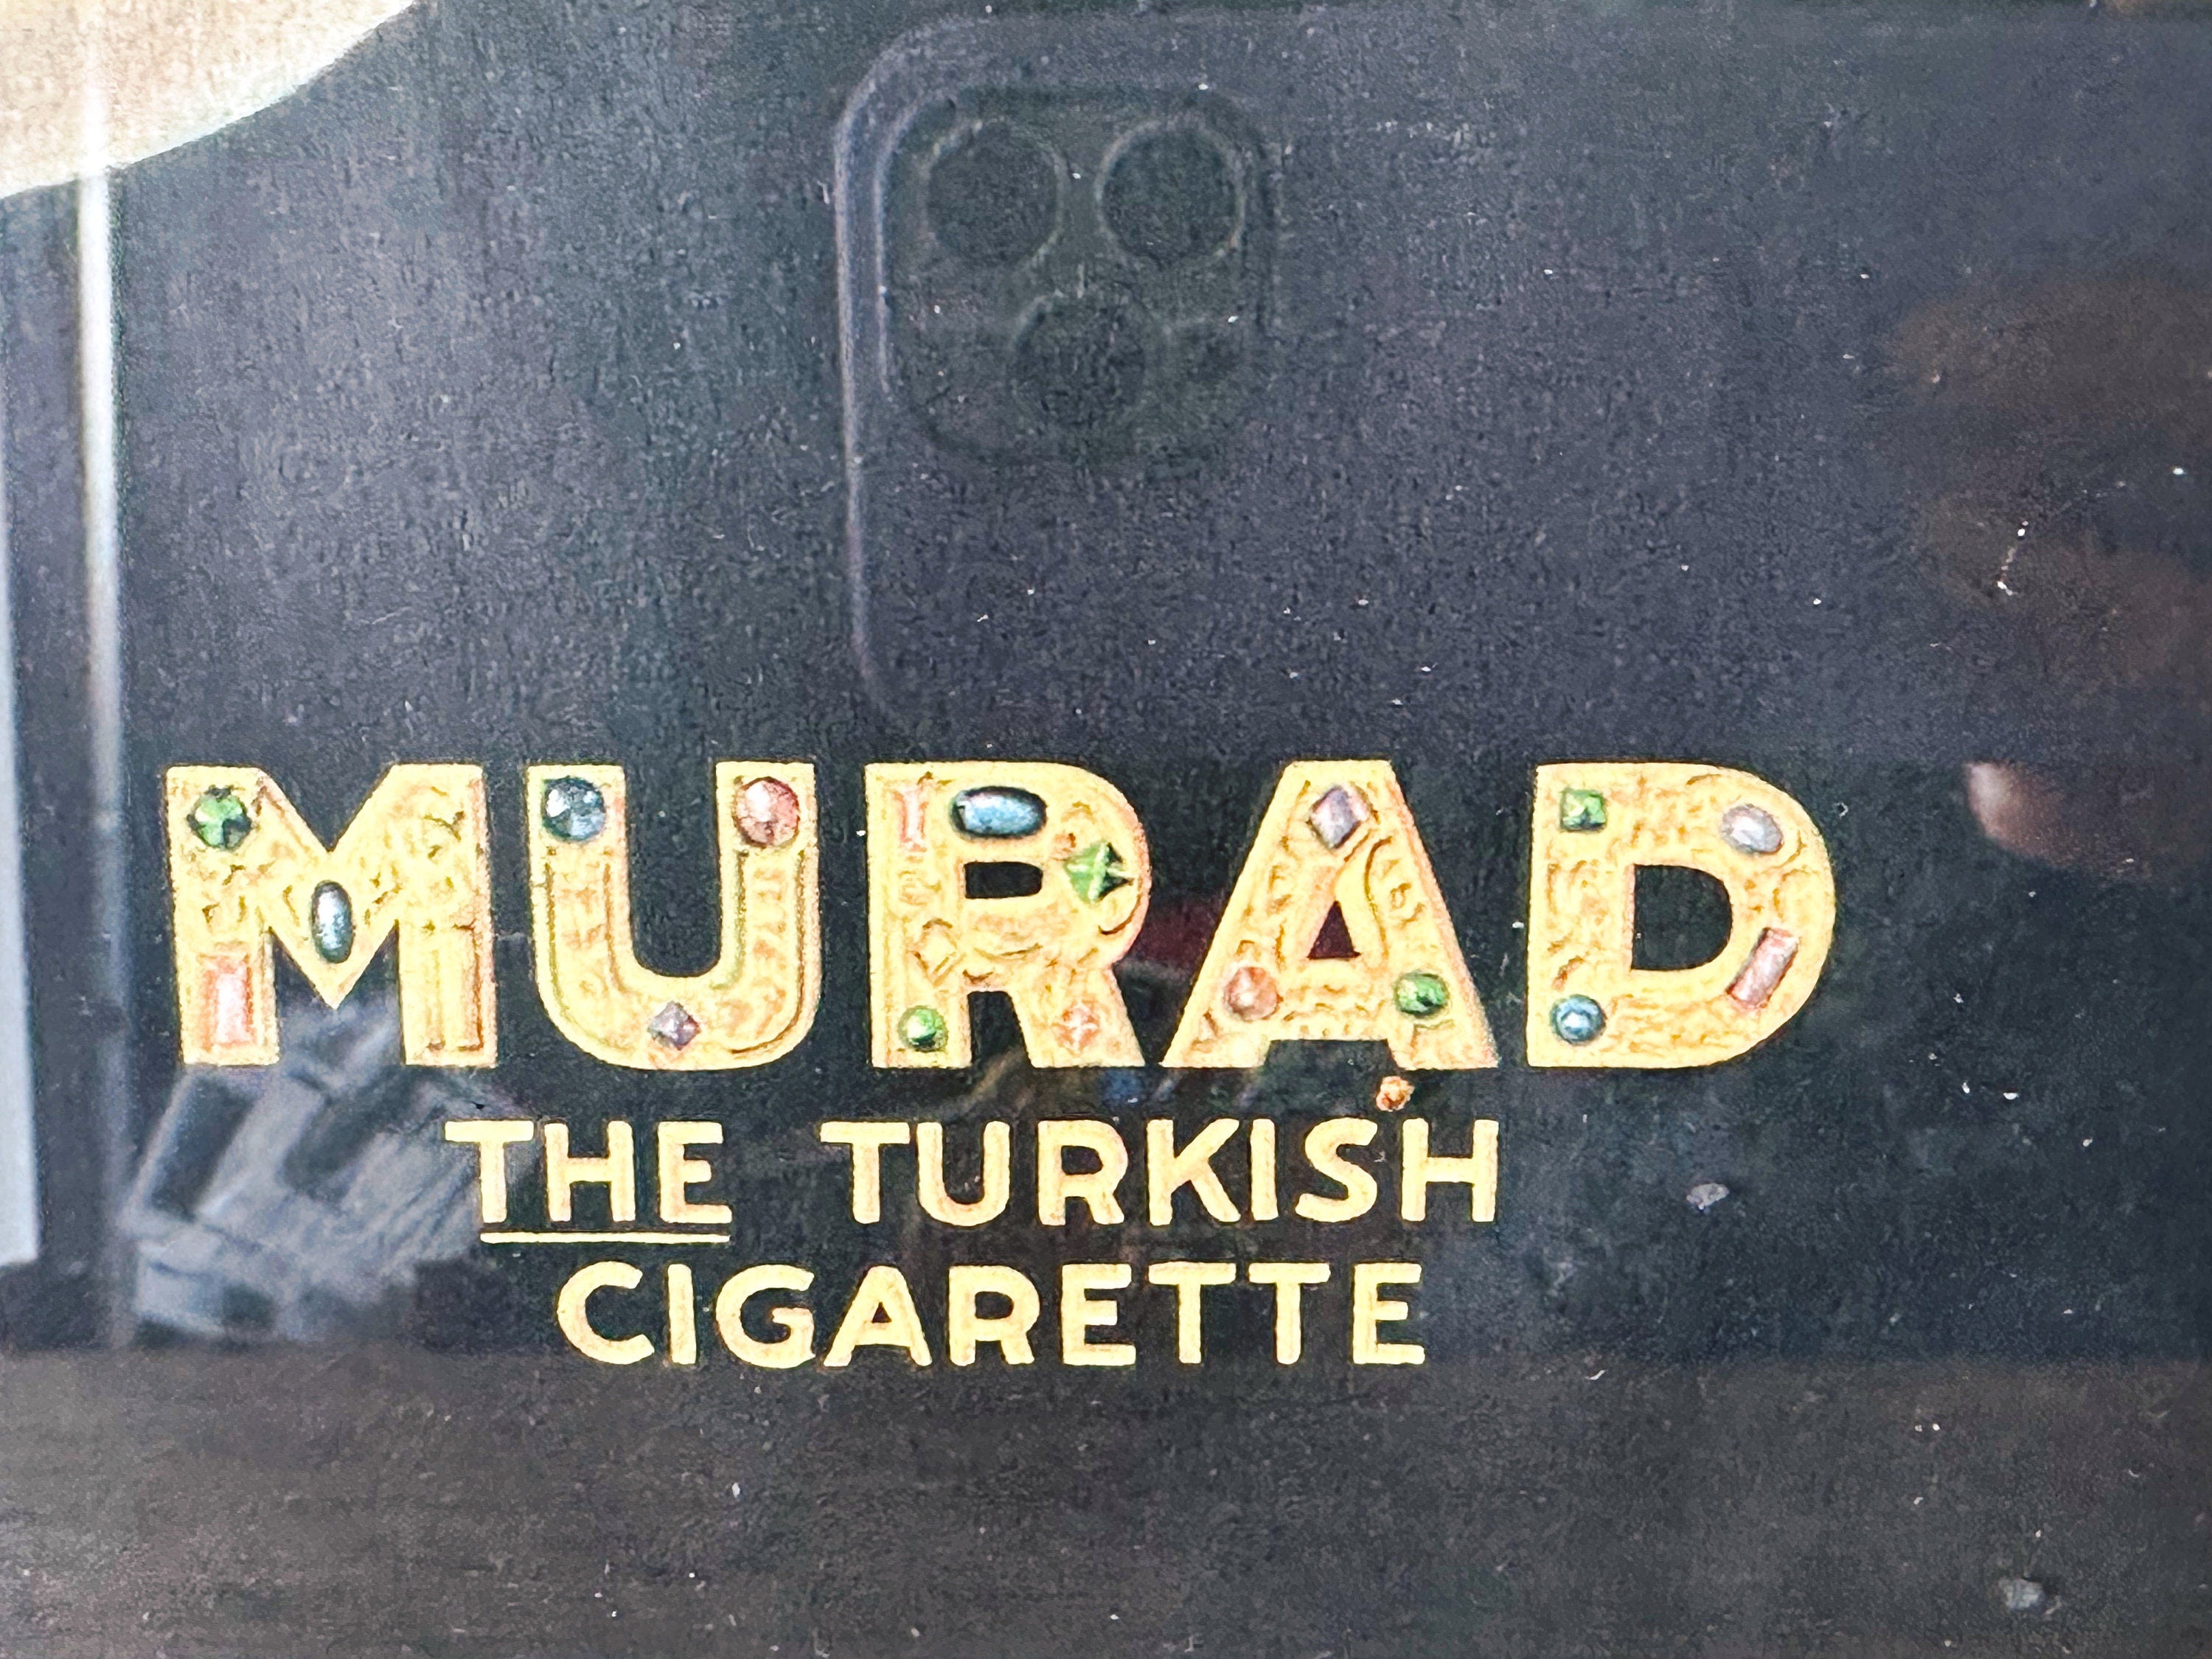 Antique Murad Turkish Cigarettes Advertising Poster in Wooden Frame | Vintage Tobacciana Art Collectible Advertisement | Gallery Wall Art